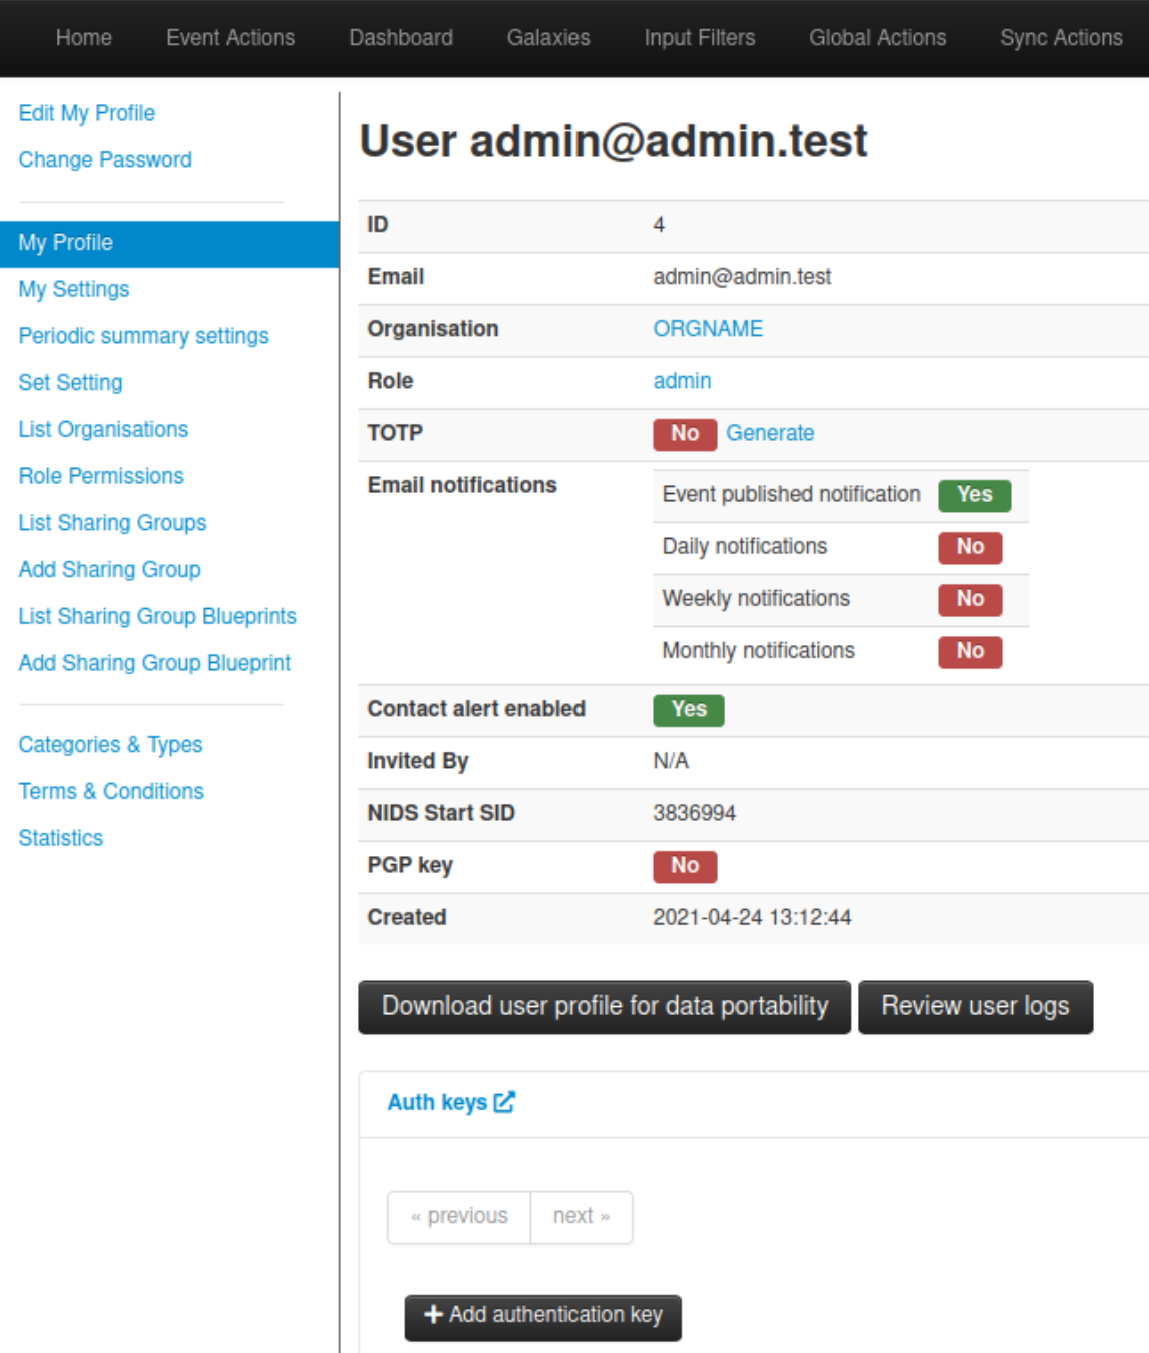 Screenshot of My Profile view with Auth keys expanded